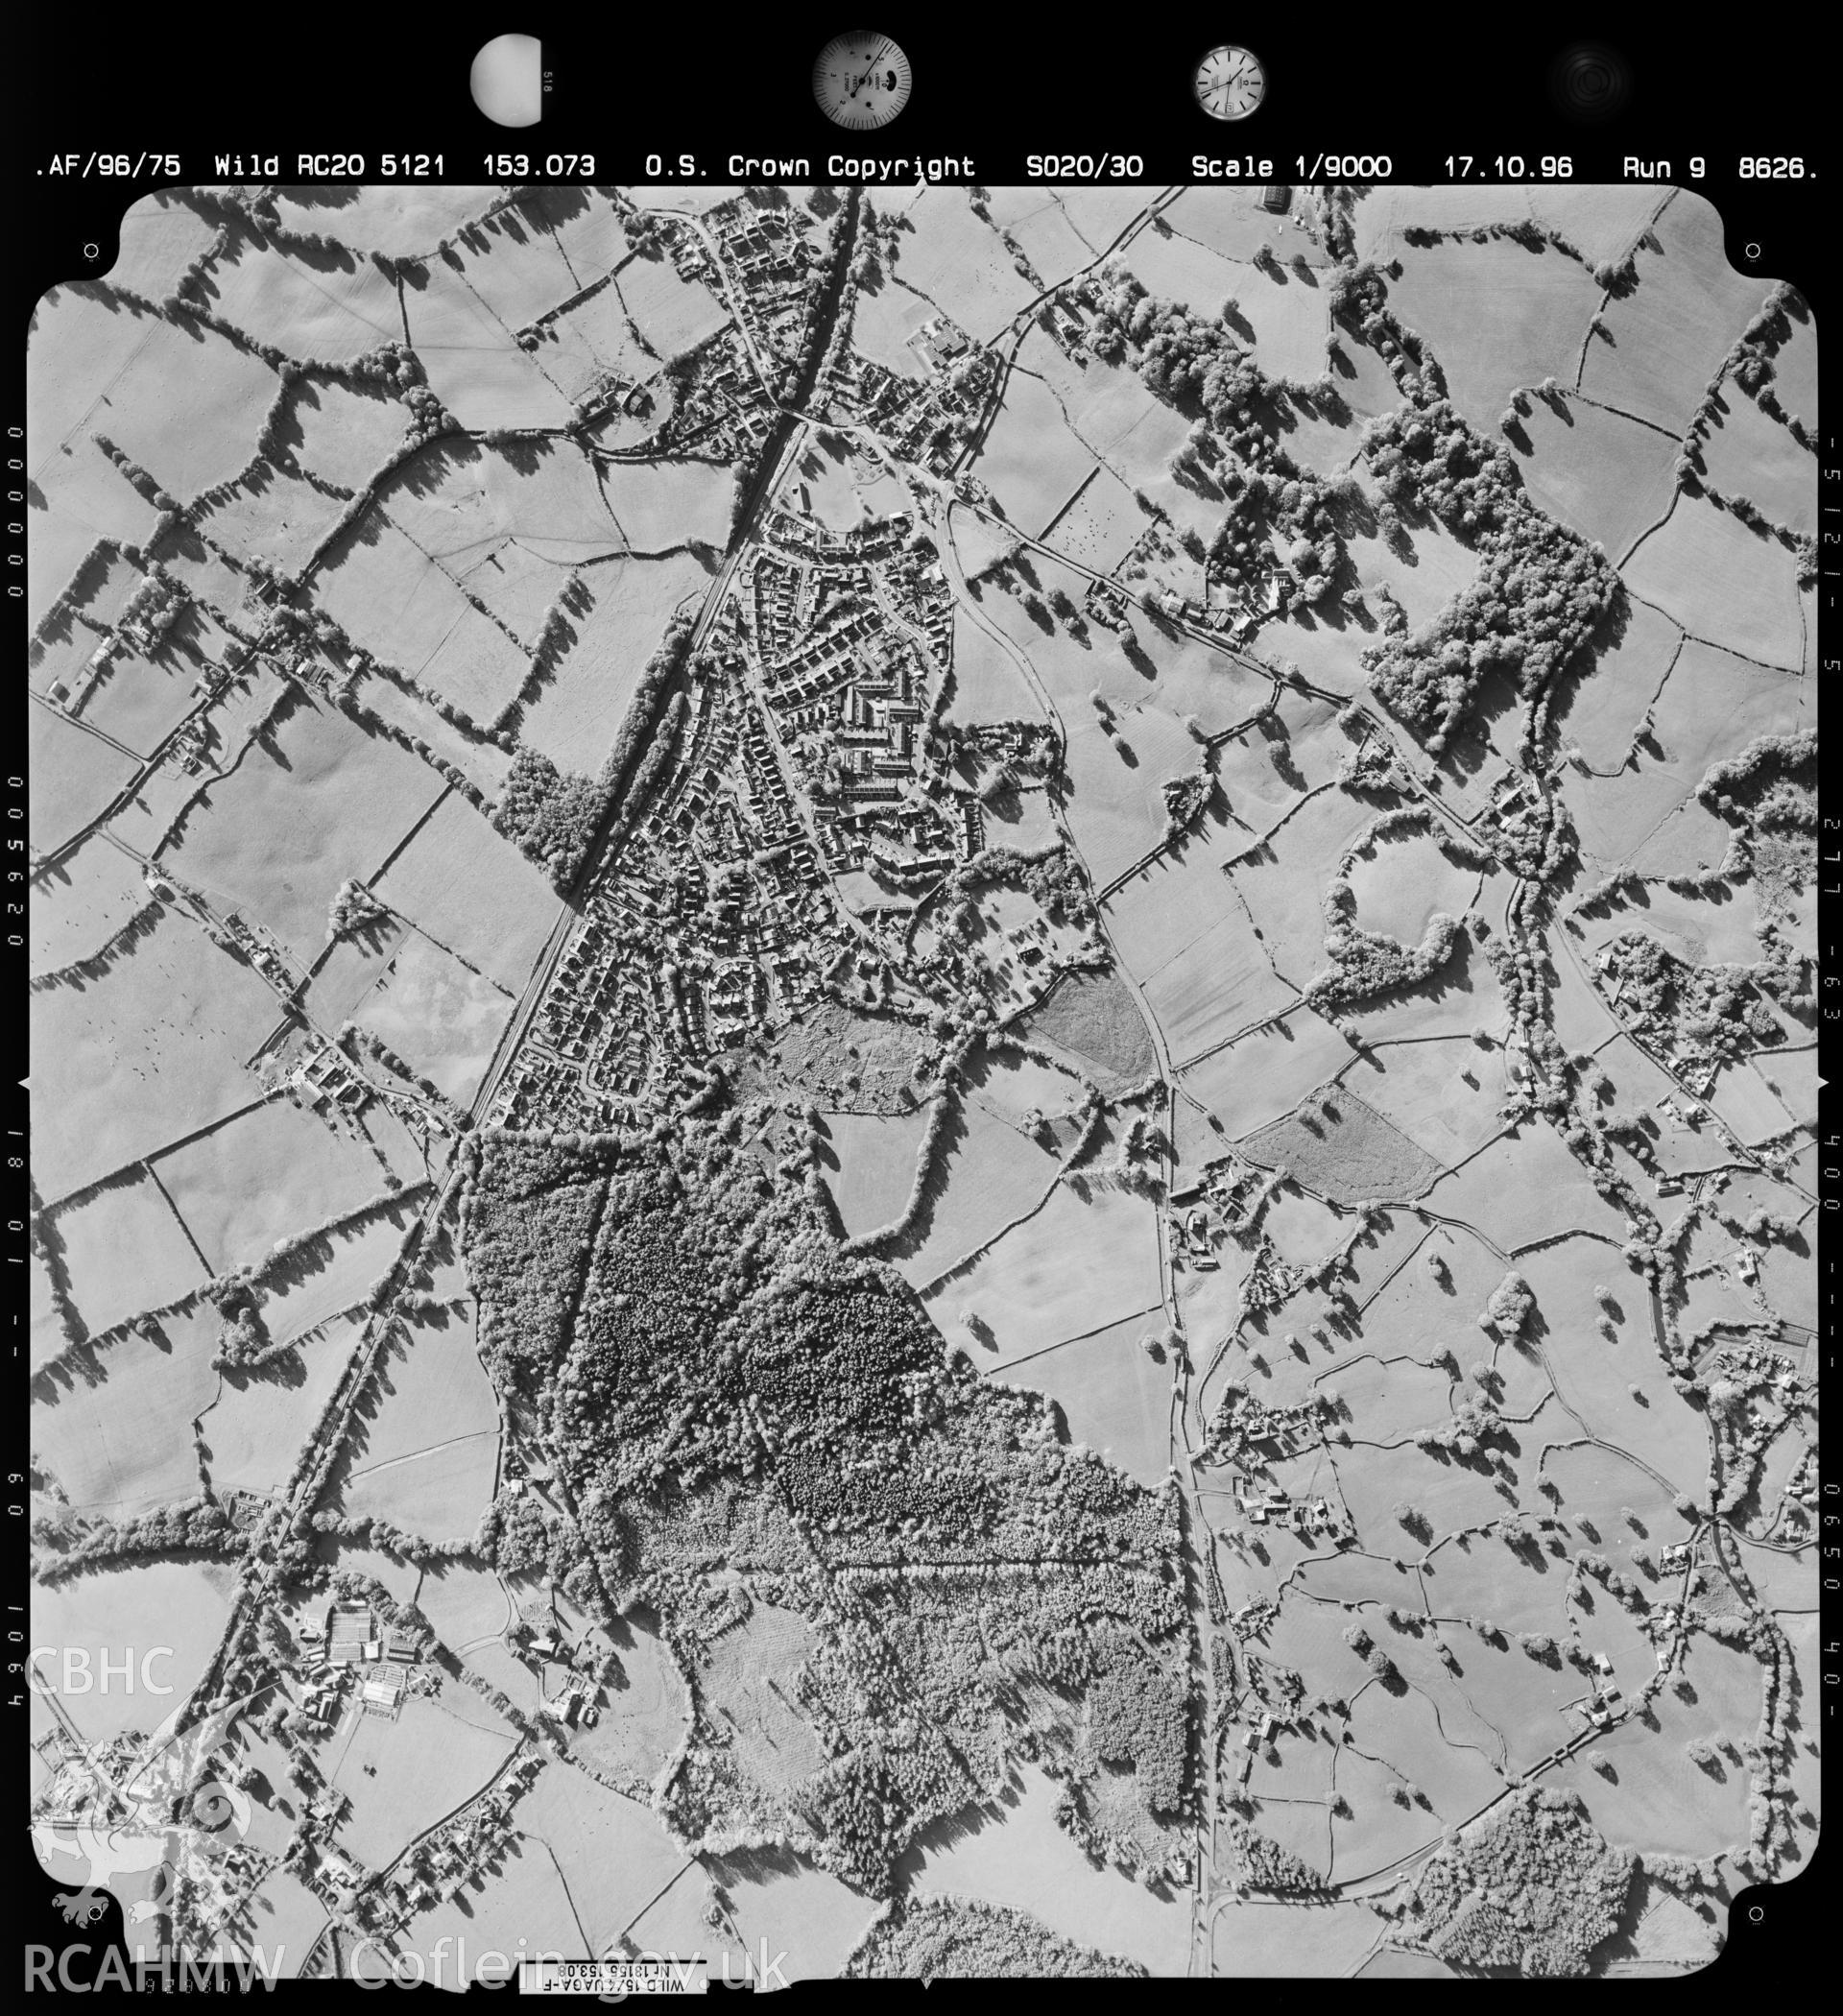 Digitized copy of an aerial photograph showing the Penperlleni area of Goetre Fawr, grid reference SO324050, taken by Ordnance Survey, 1996.